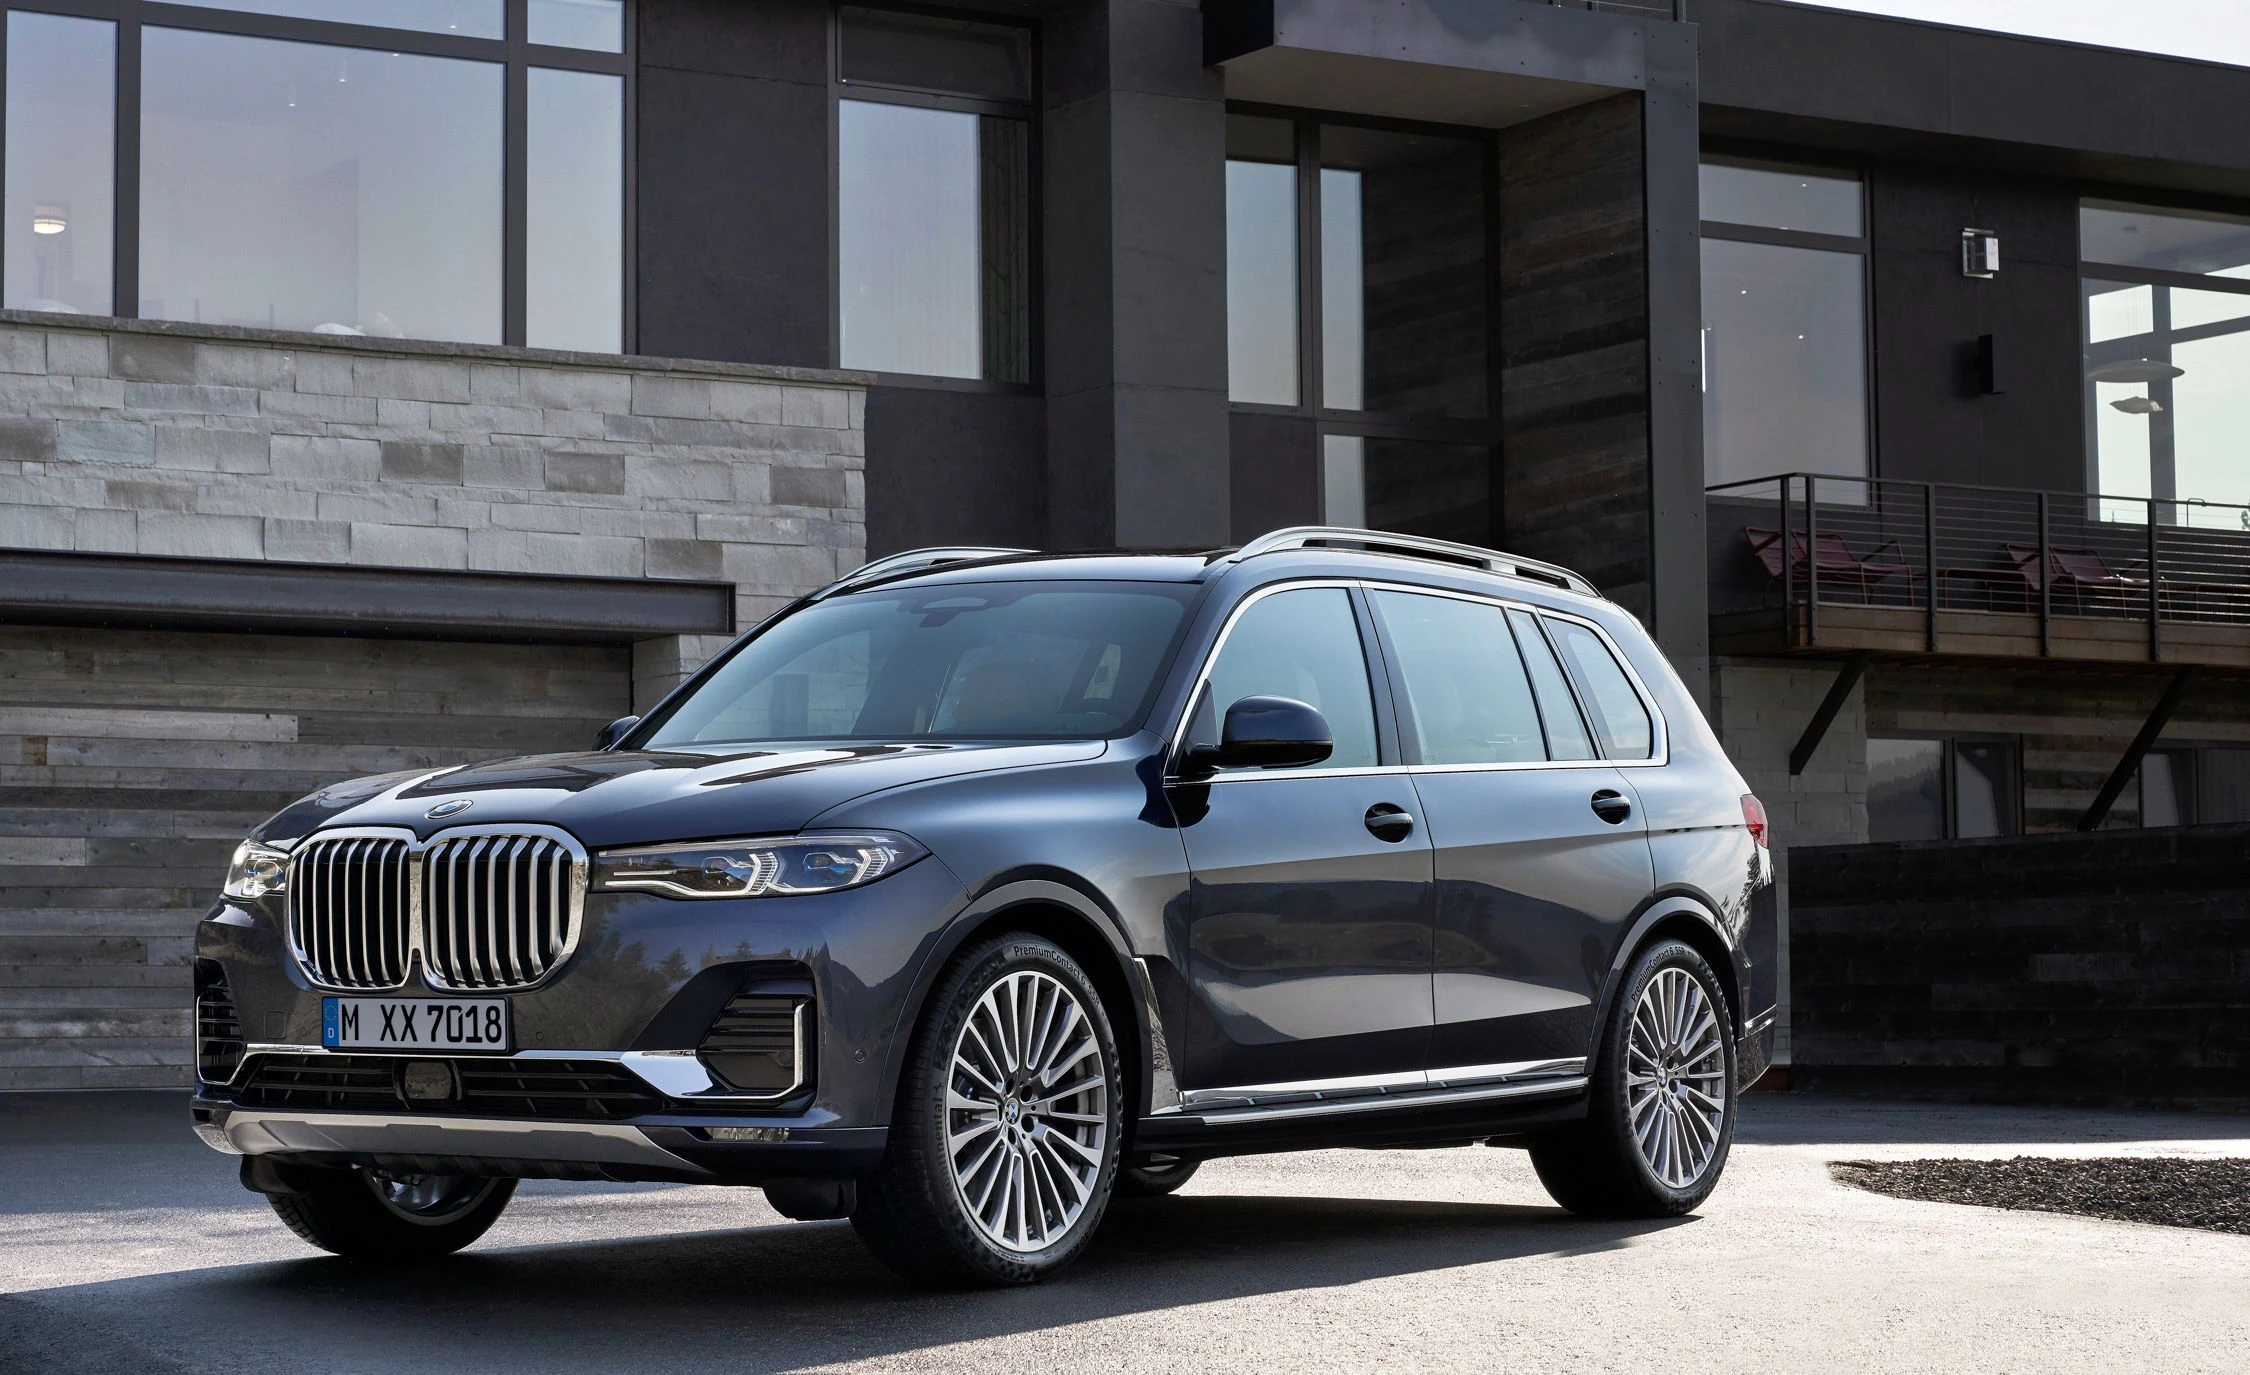 New BMW Model - The X7